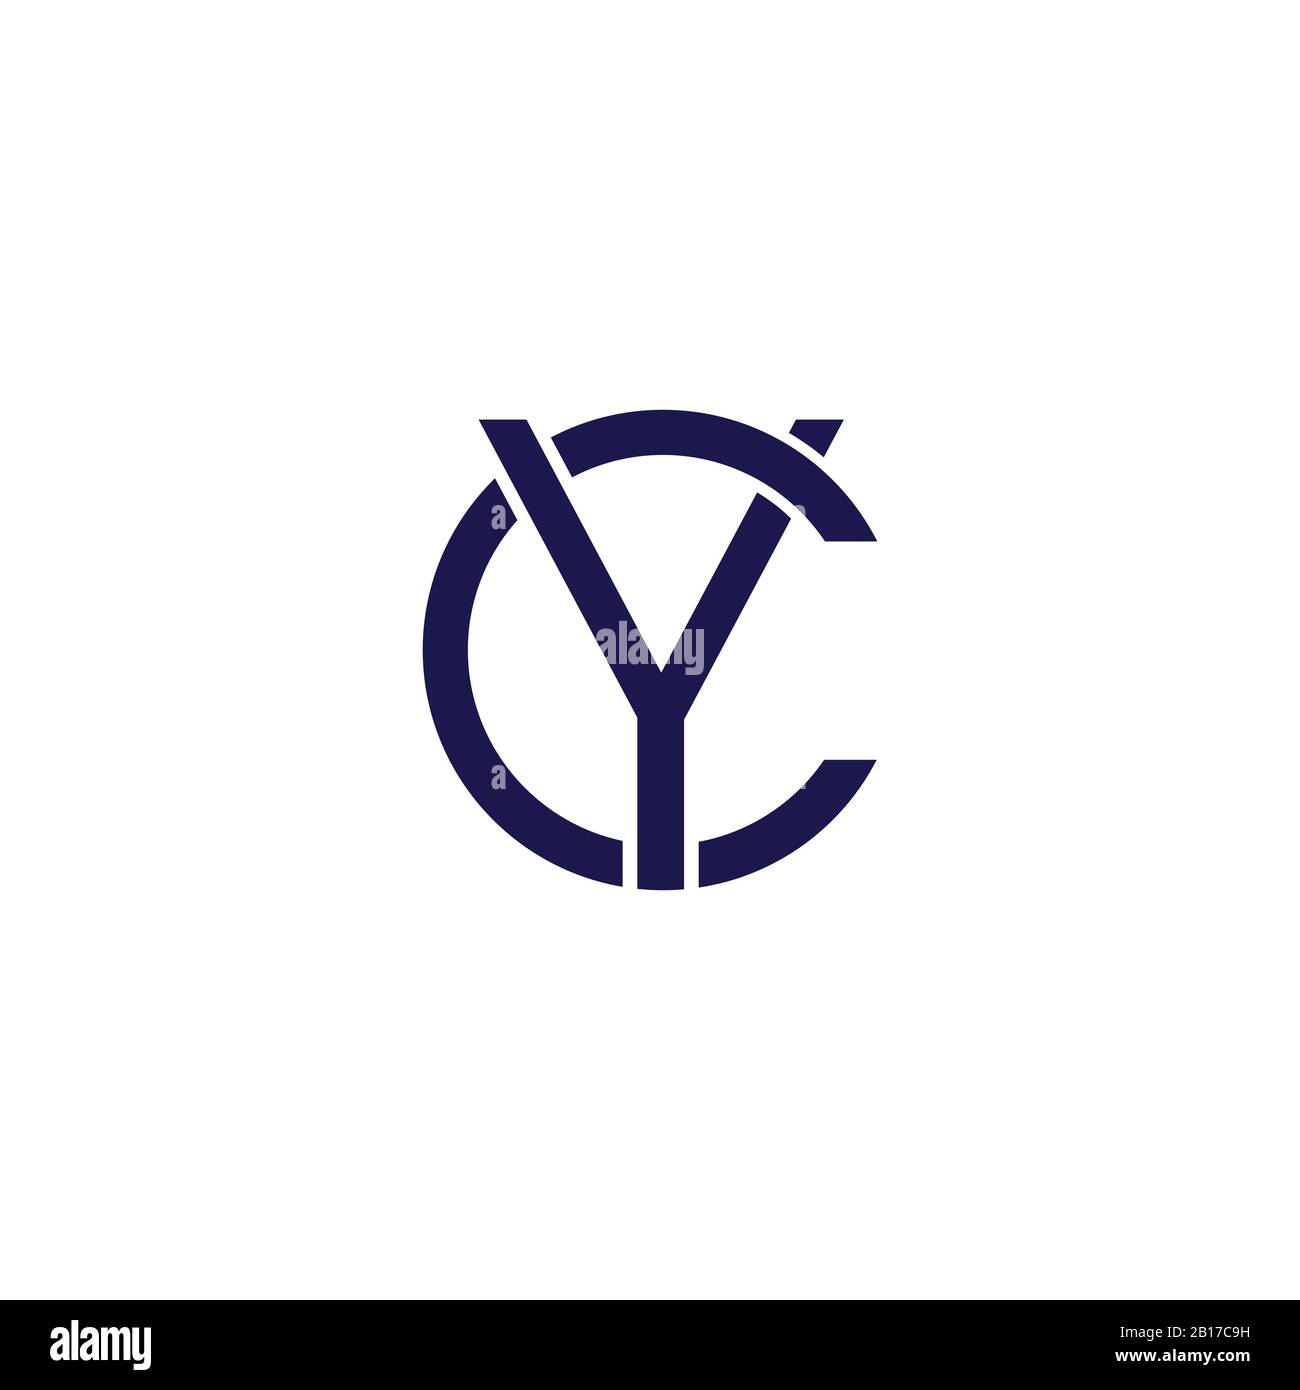 initial letter yc or cy logo vector design Stock Vector